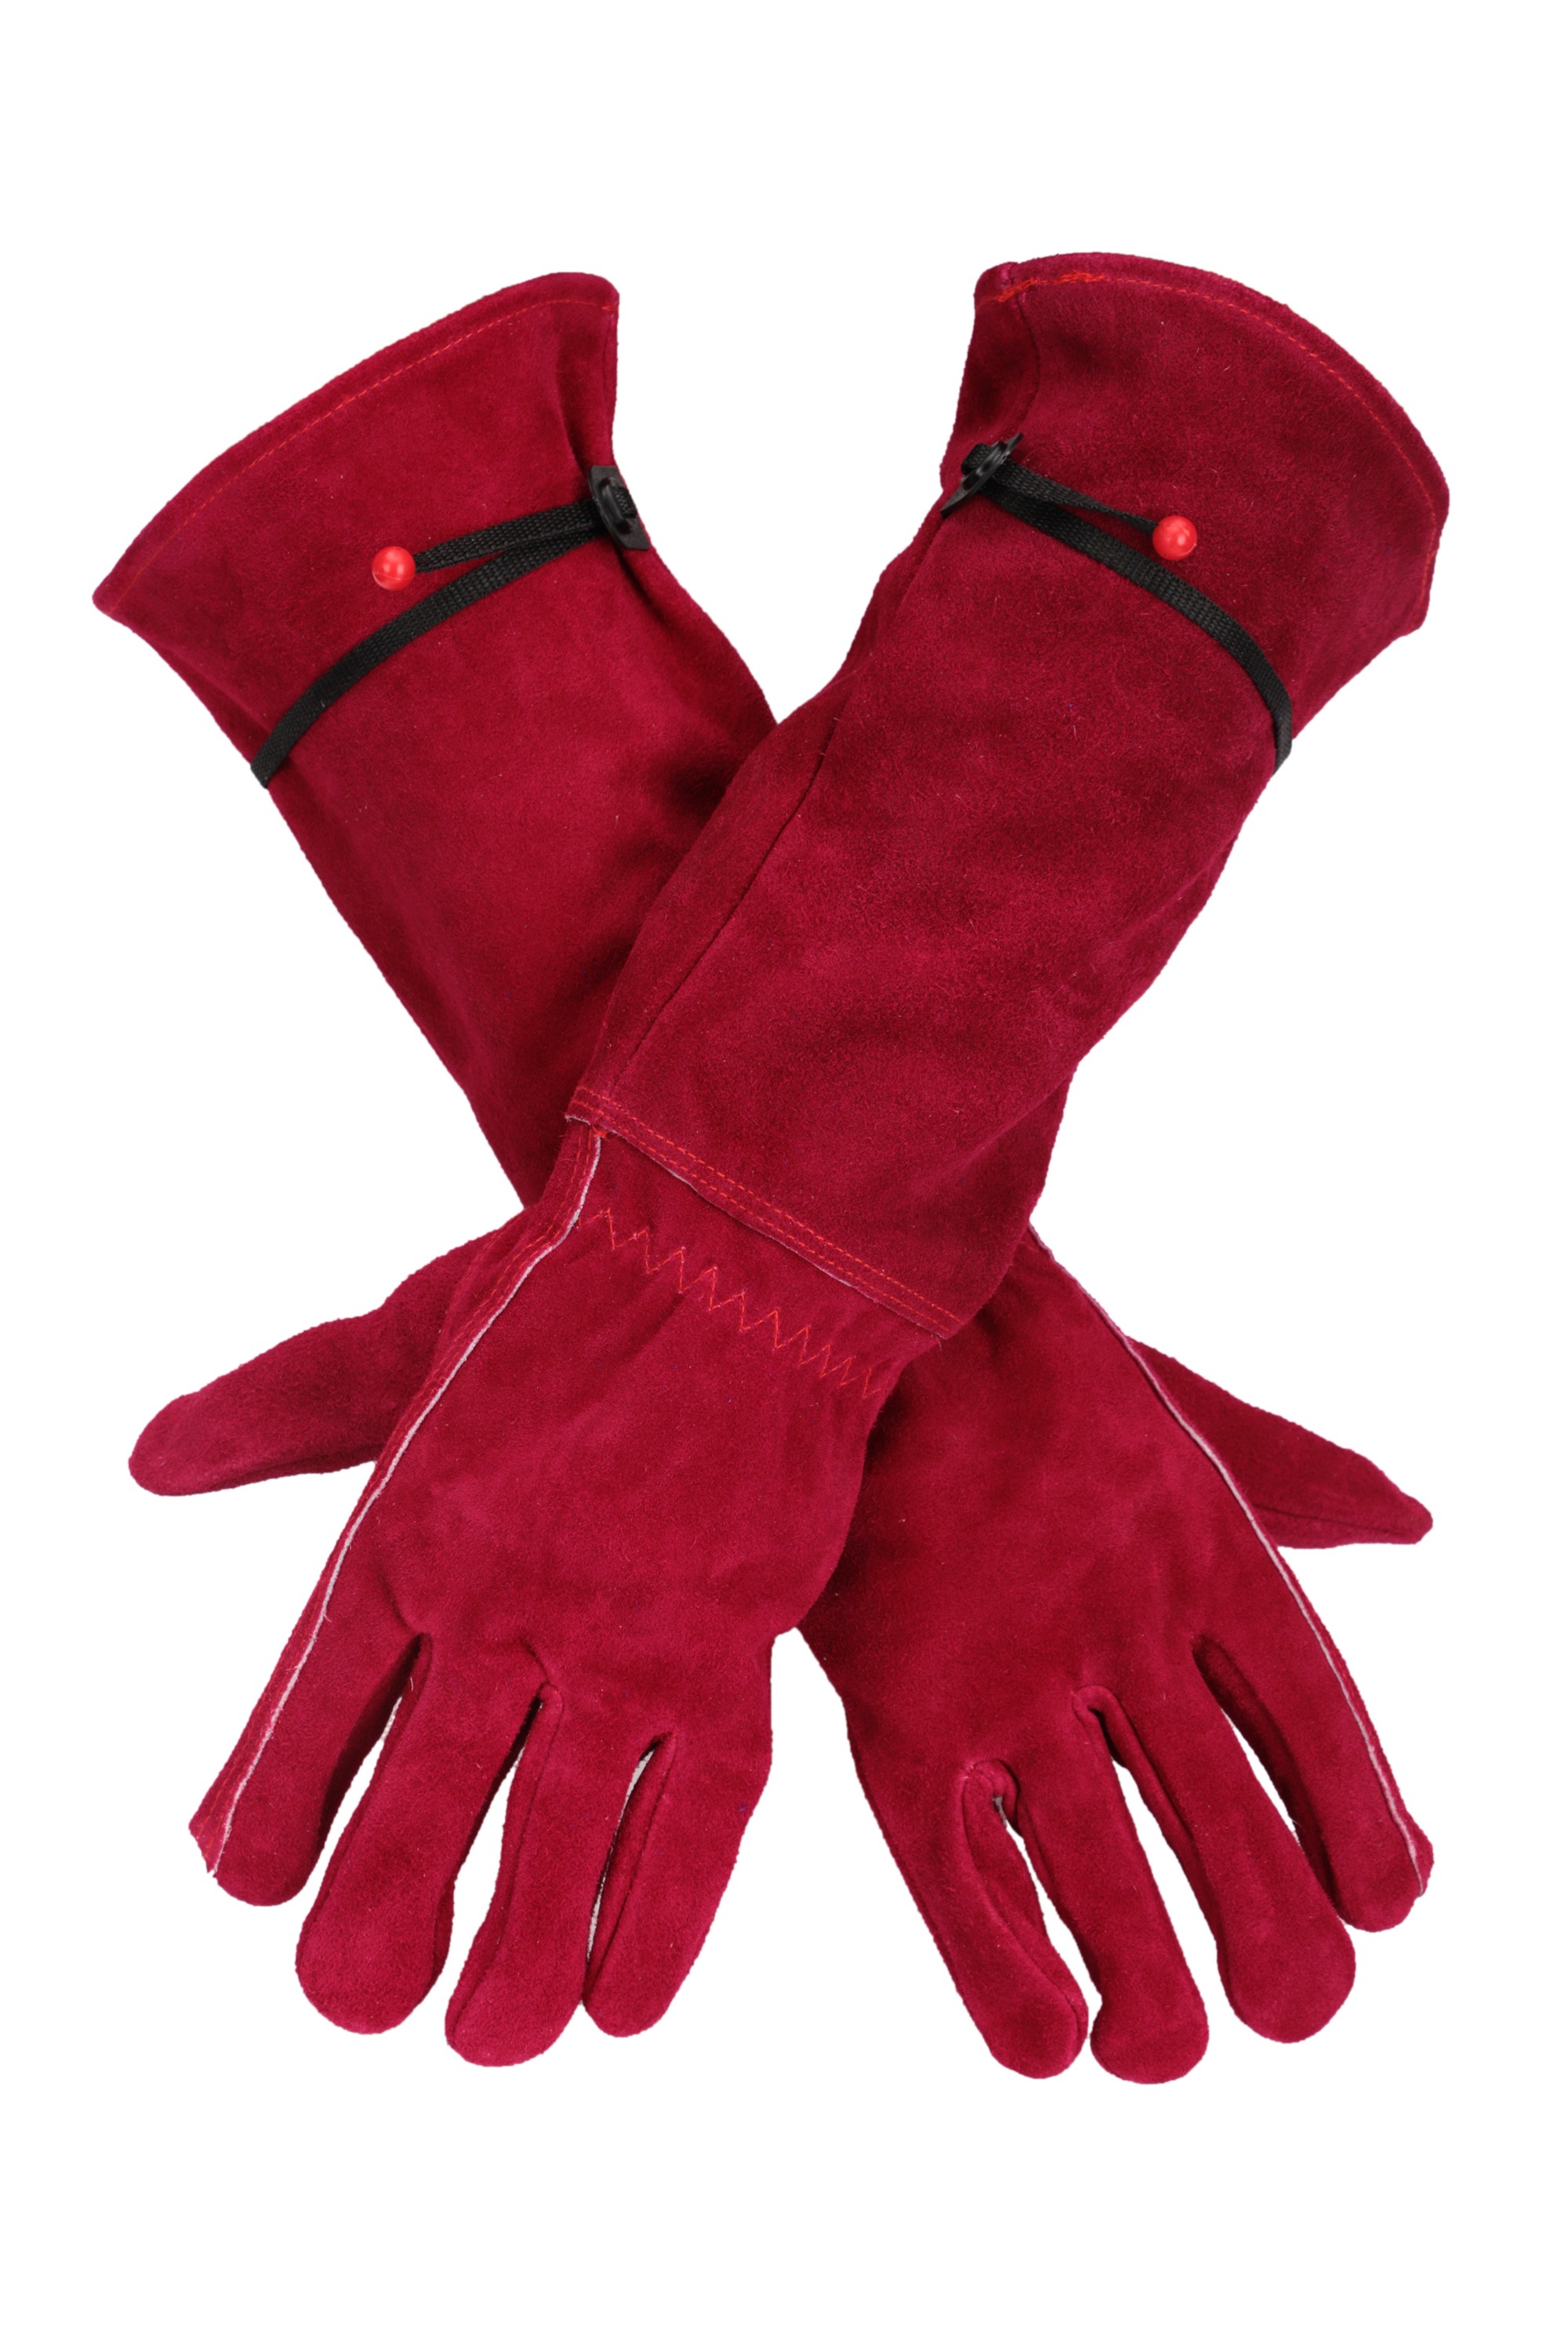 Kim Yuan Leather Welding Gloves, Heat and Fire Resistant, Ideal for Gardening, Tig Welding, Beekeeping, Barbecue